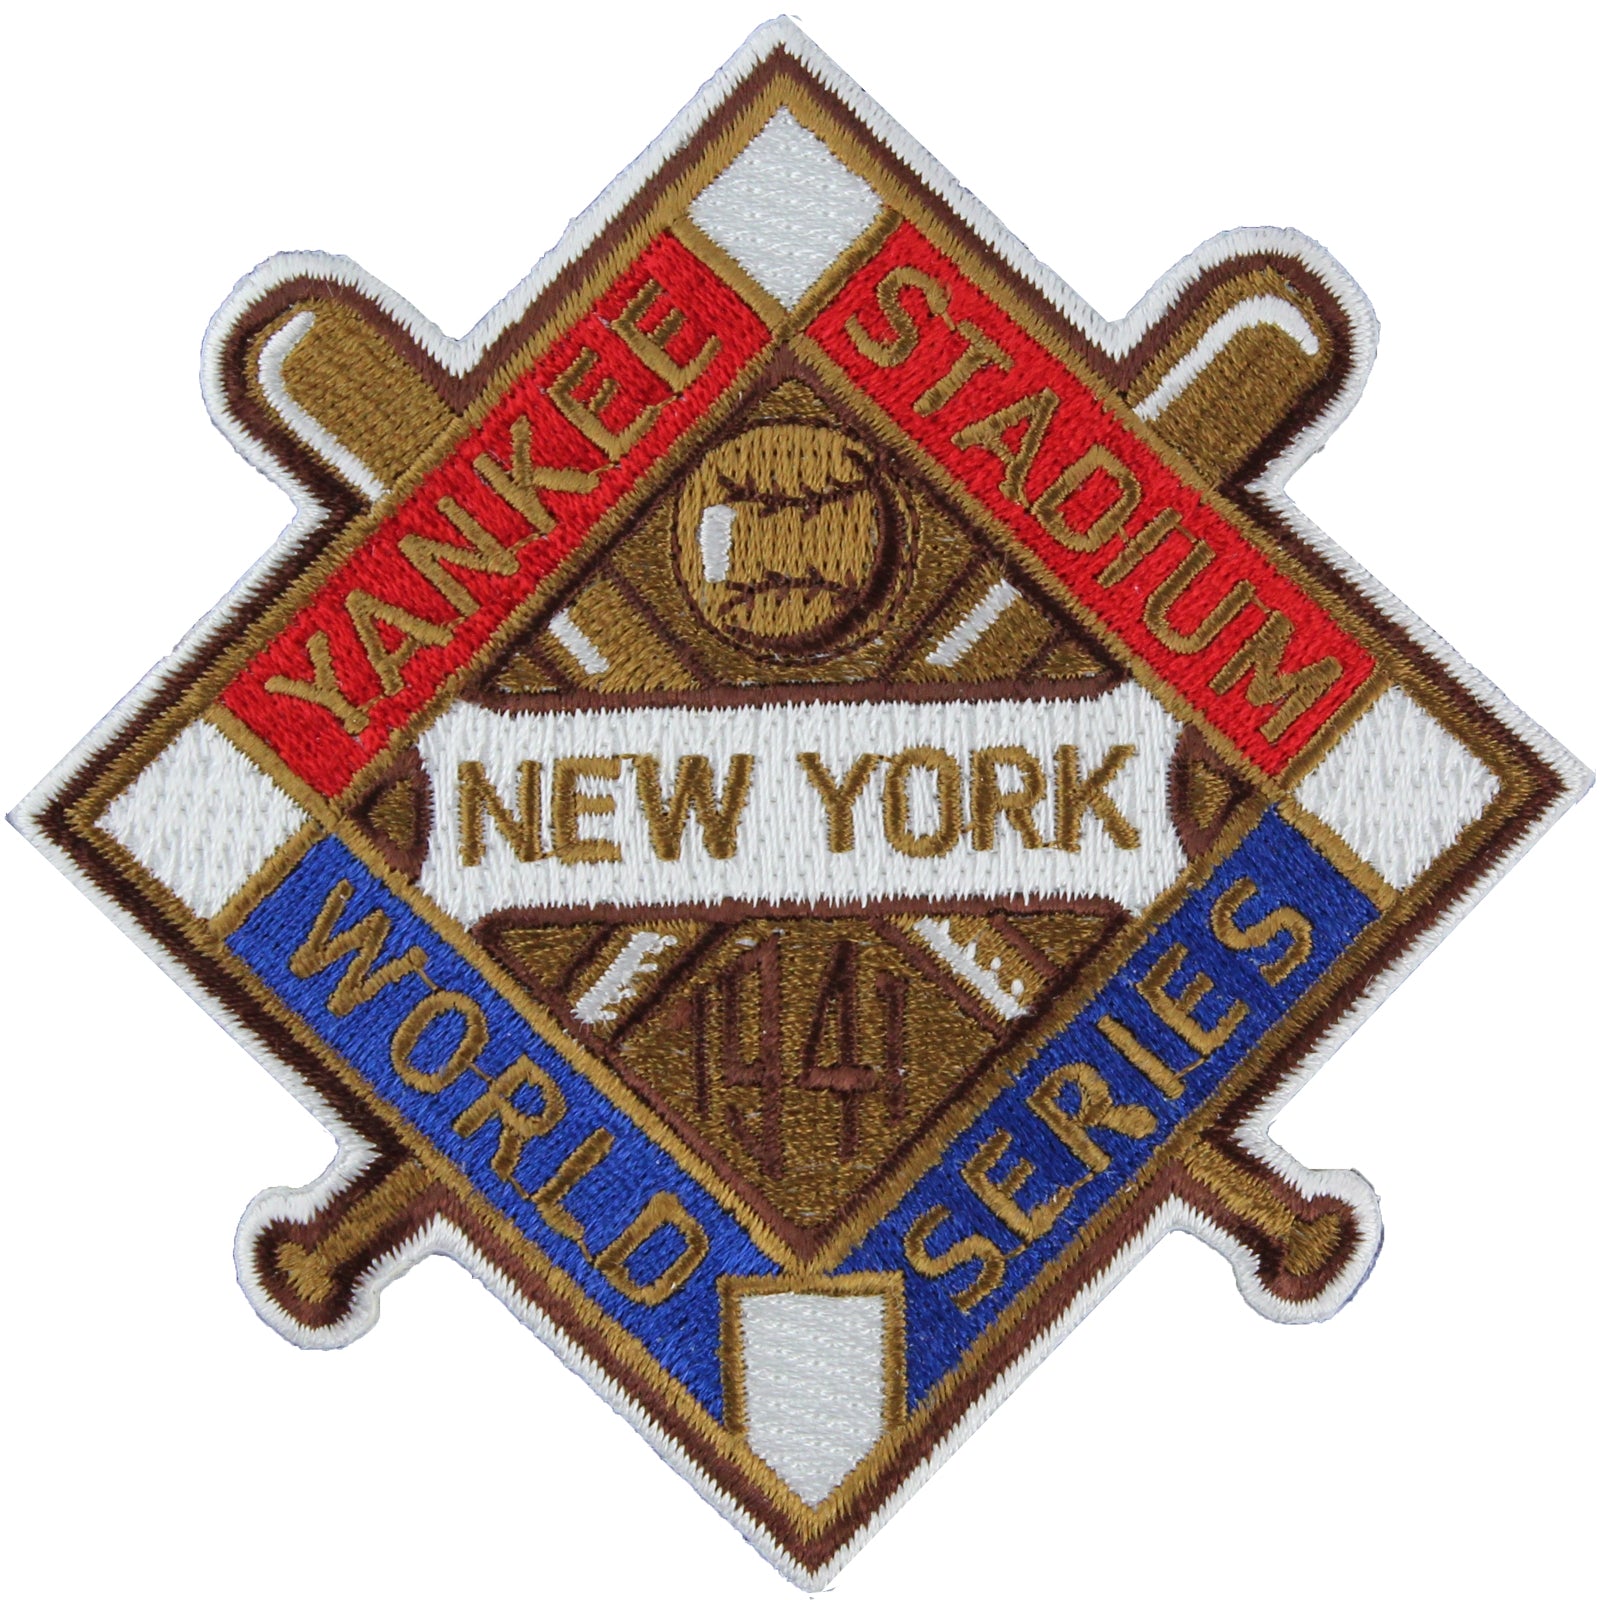 New Jersey Patch Collector Set